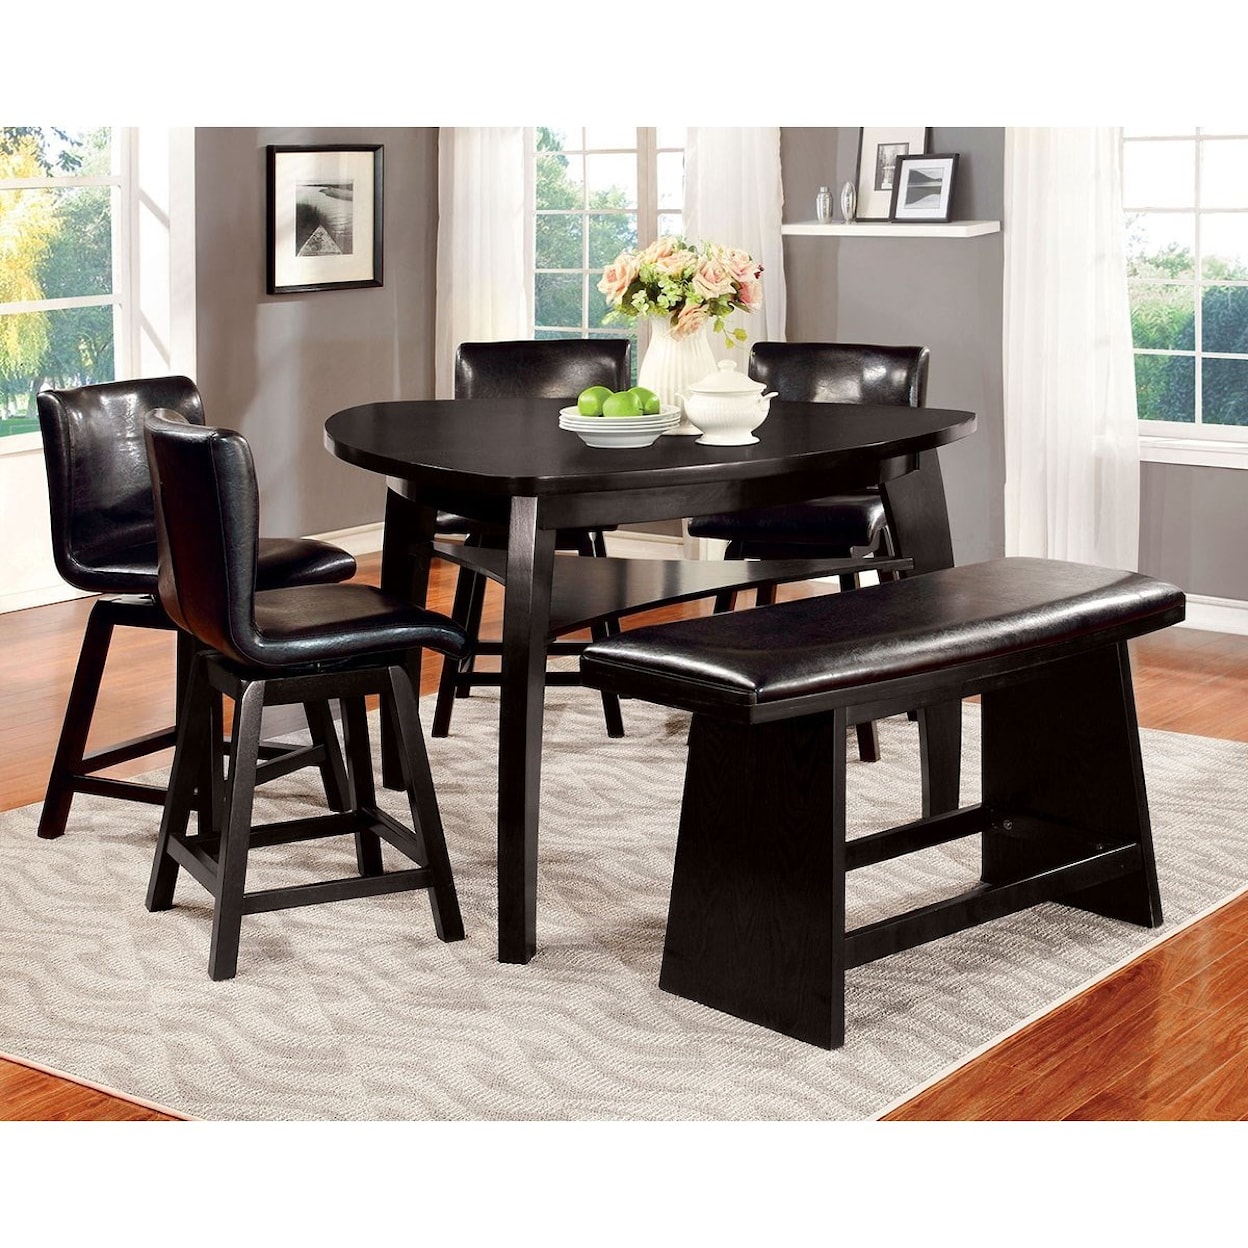 Furniture of America Hurley Counter Height Table